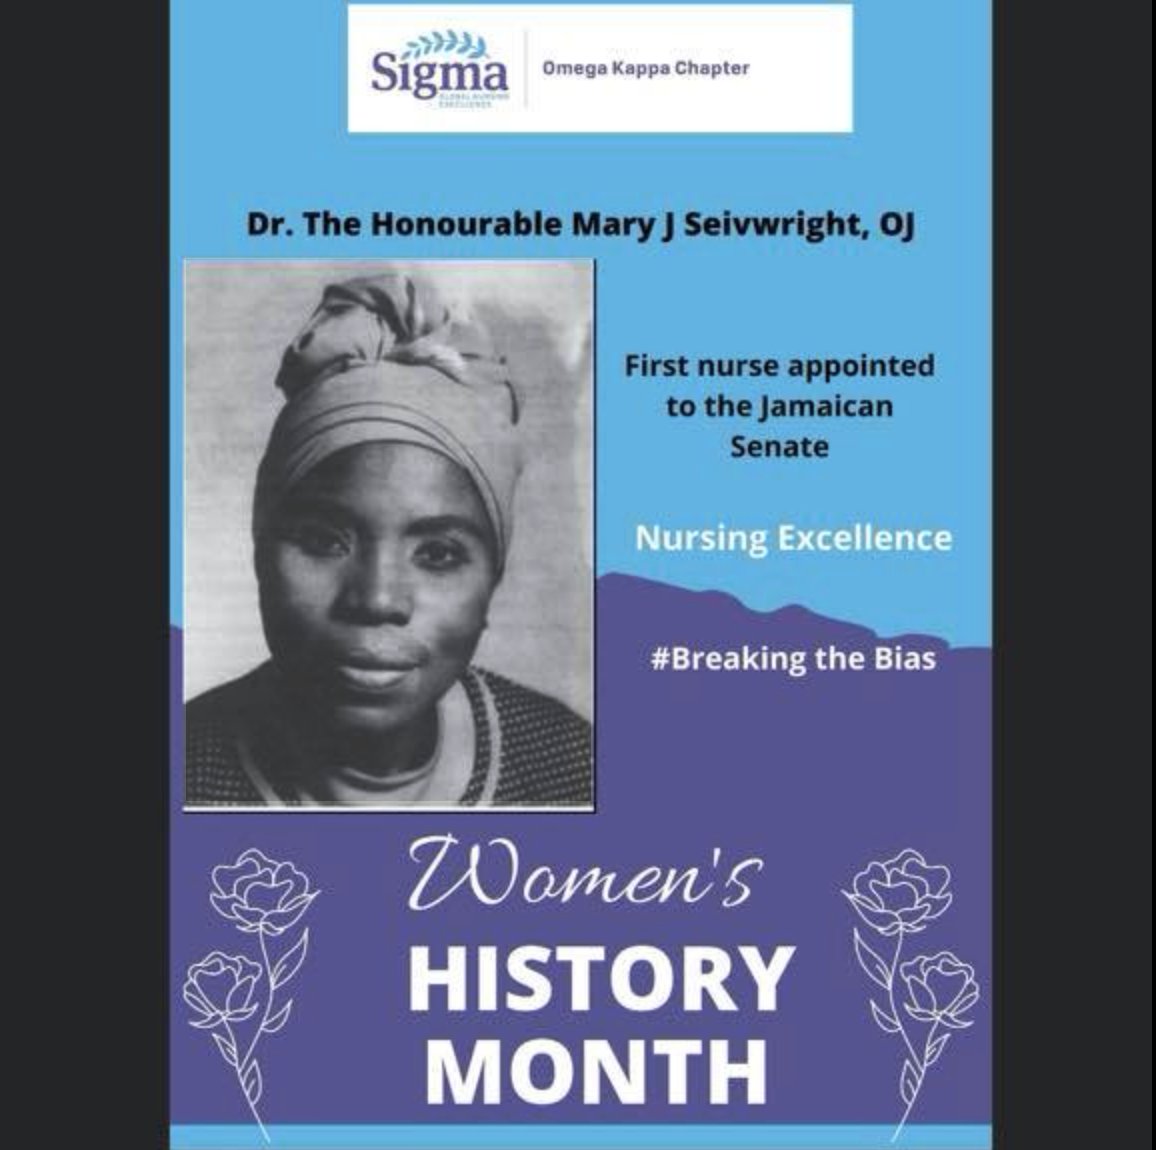 Mary J. Seivwright (12 April 1923-Jan 2014), #Jamaican nurse practitioner, educator, born 101 years ago today. Instrumental in developing culture of research in field of nursing #Jamaica, #Caribbean. Director of Advanced Nursing Education Unit (ANEU) UWI, Mona (1971-1989); 1972…